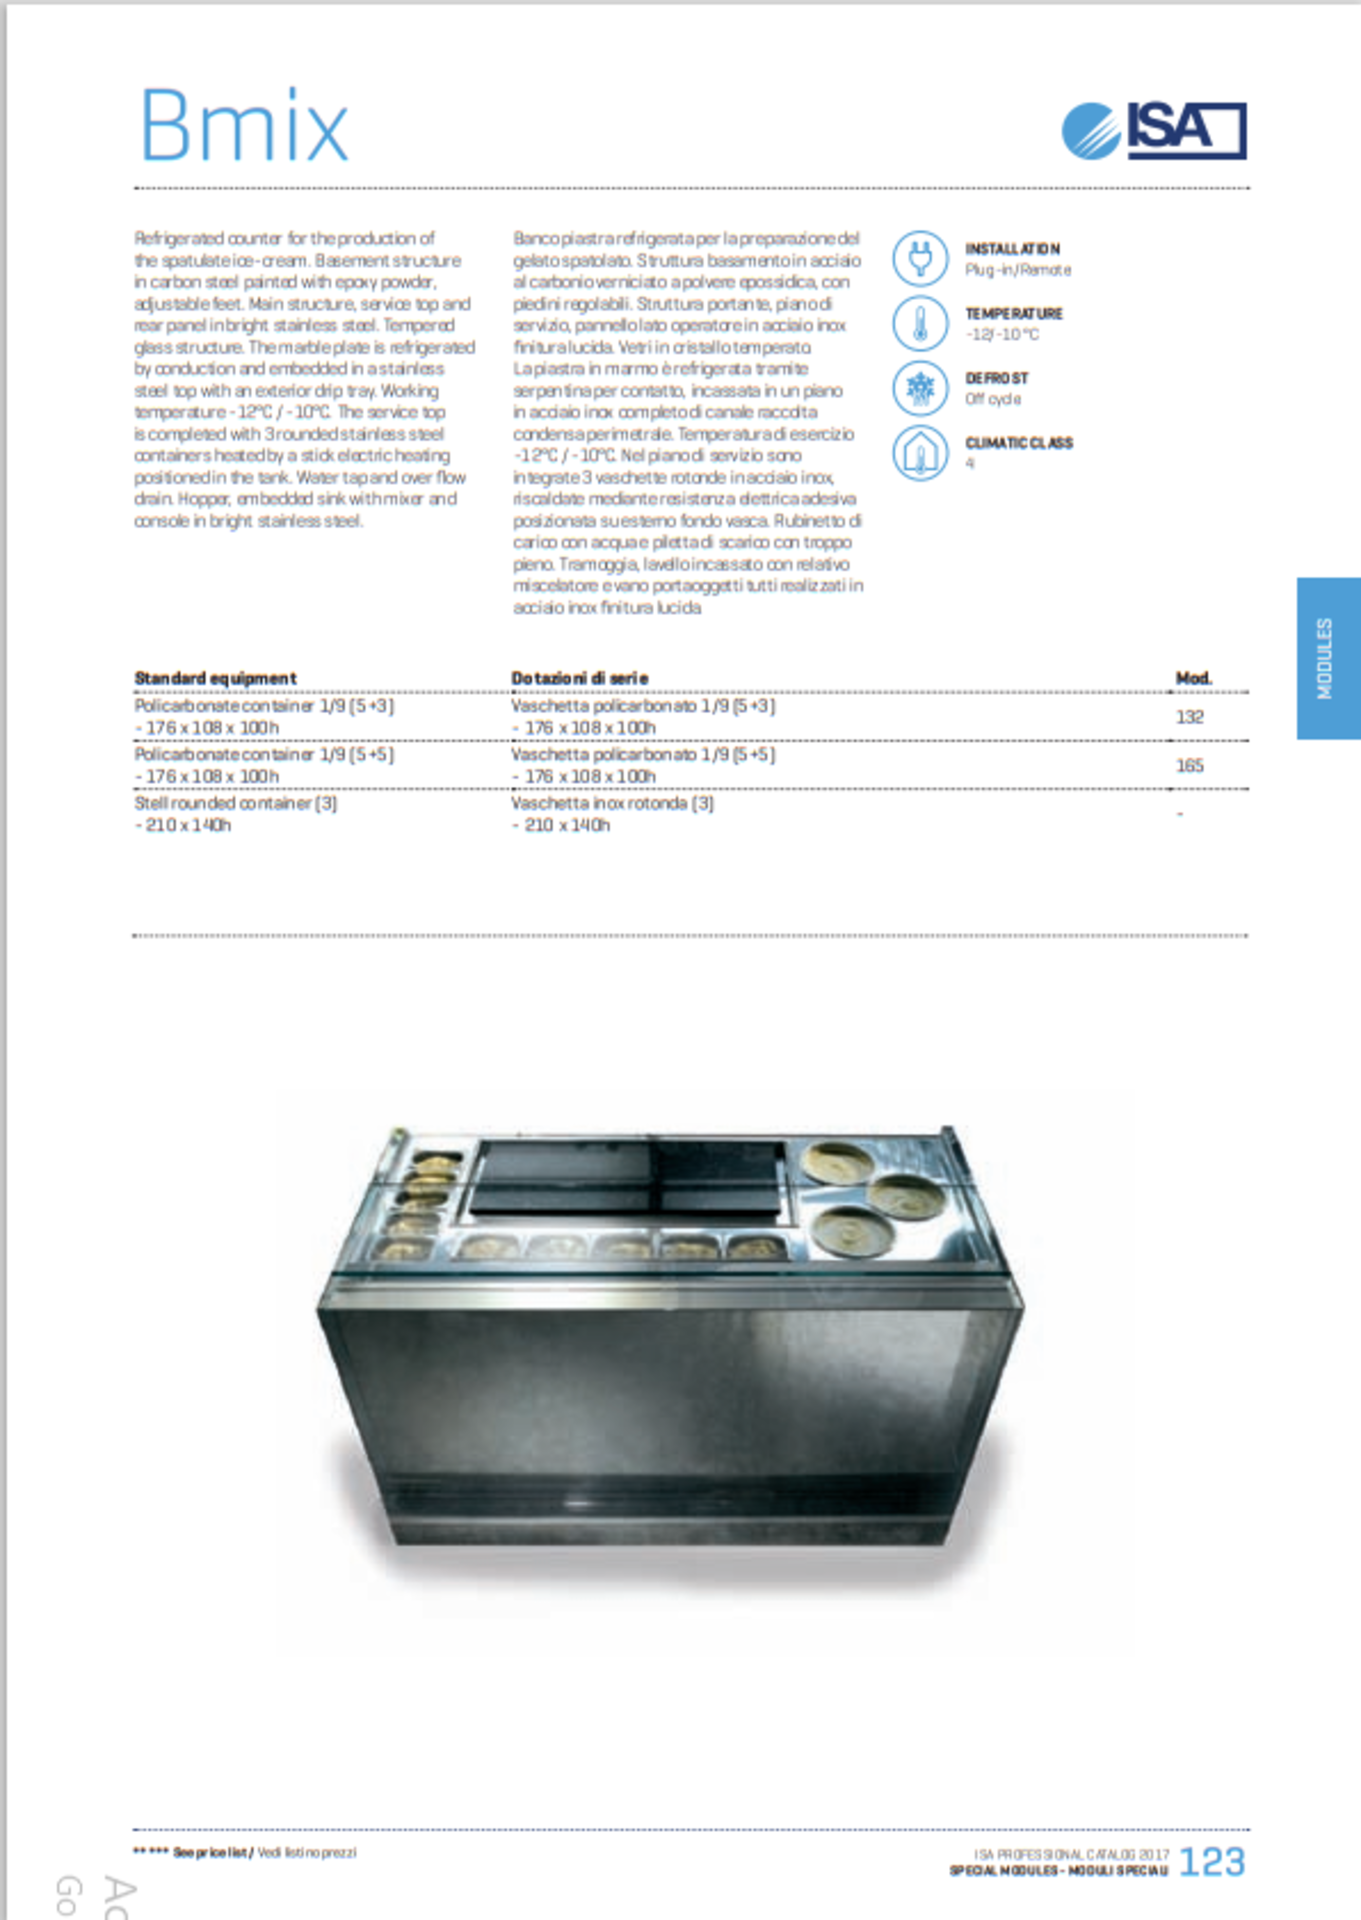 *B MIX refrigerated ice cream counter, with heated bowls and display for the production of personali - Image 2 of 13